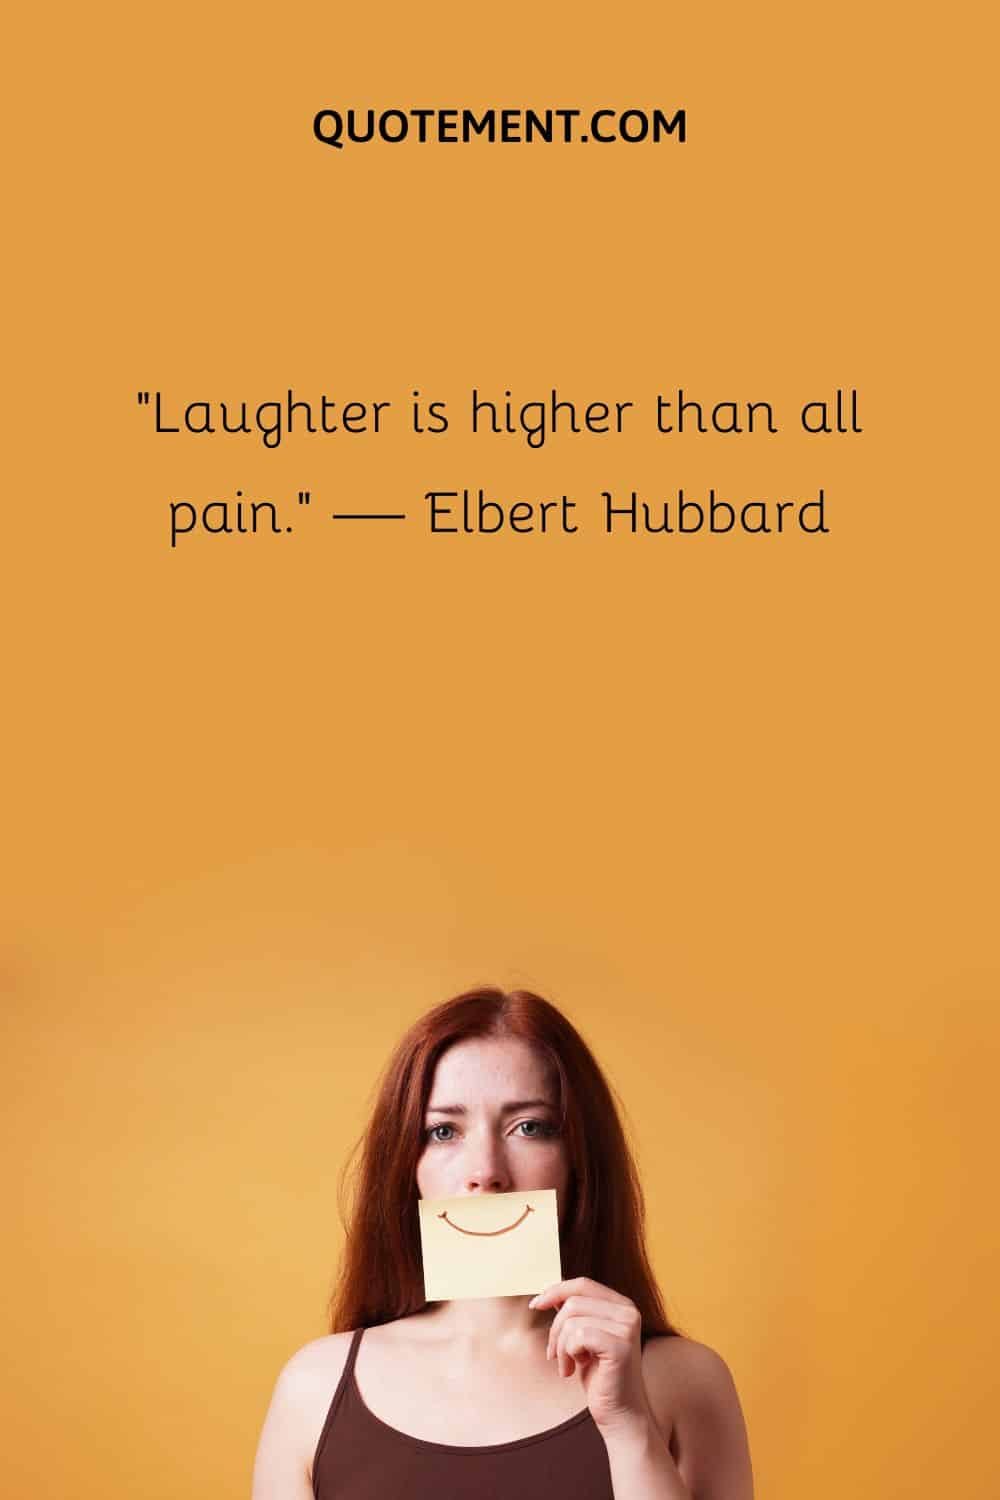 Laughter is higher than all pain